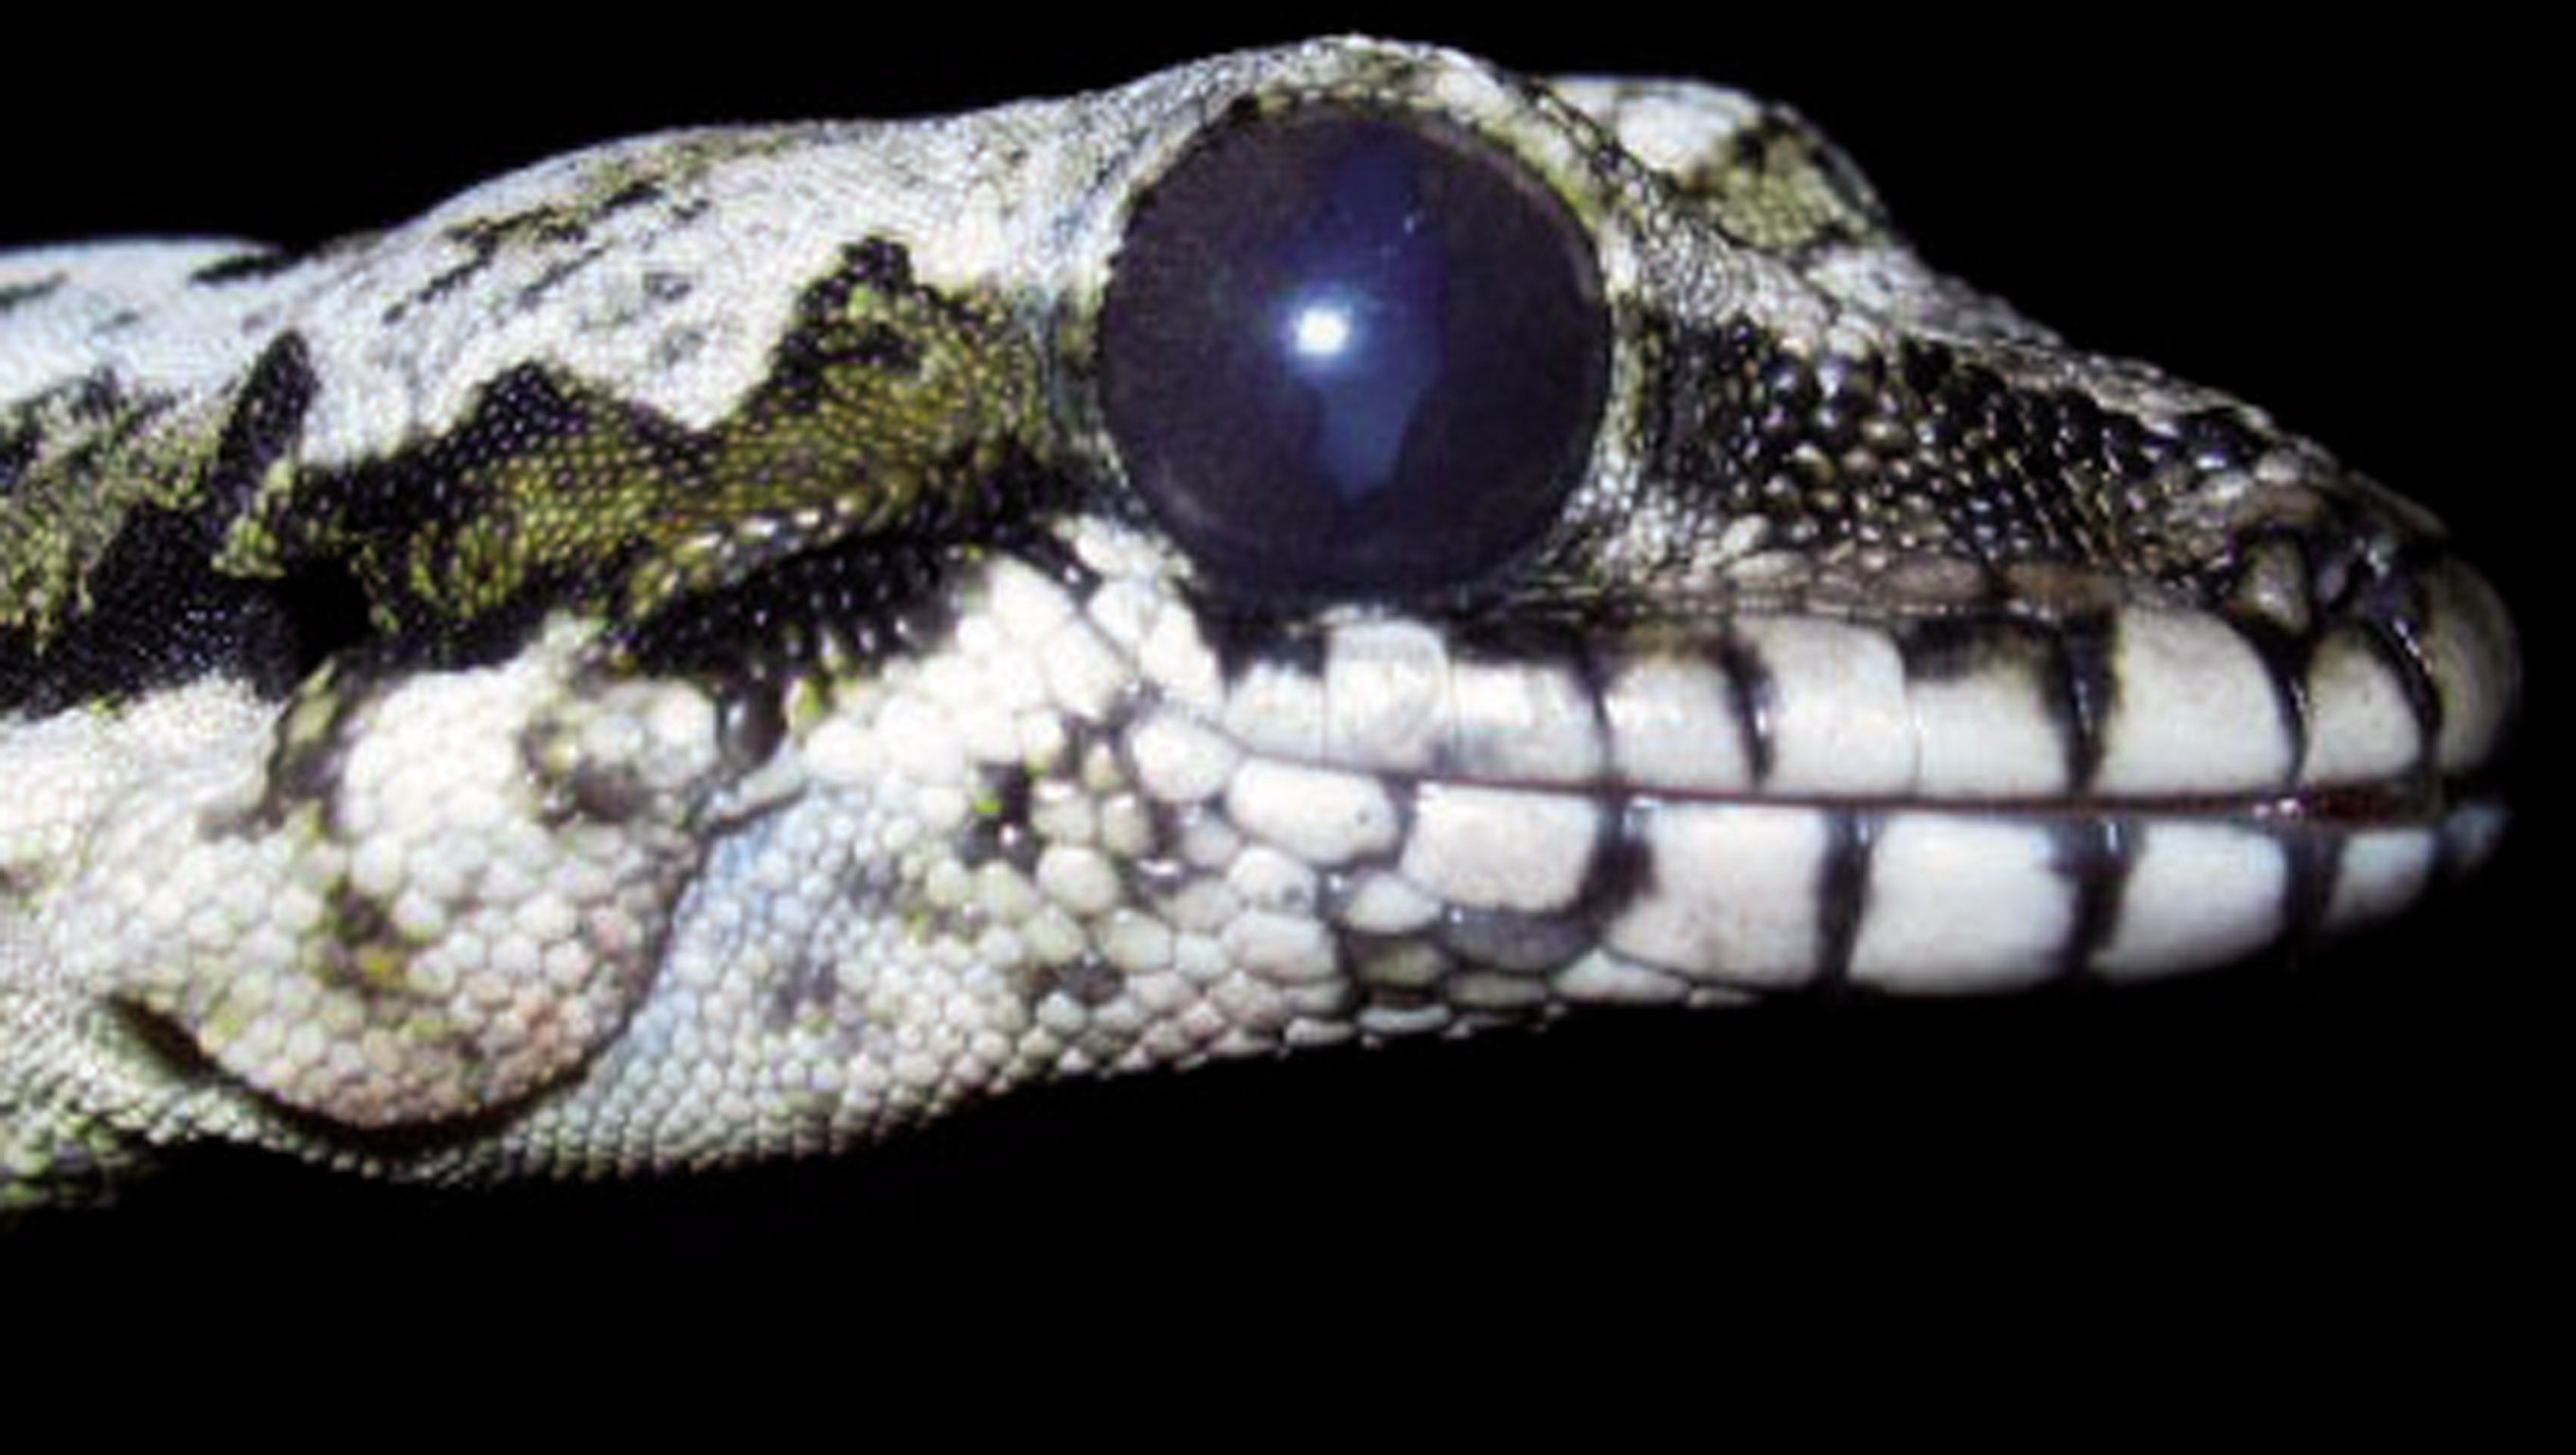 A Skydiving gecko which is among the new species found